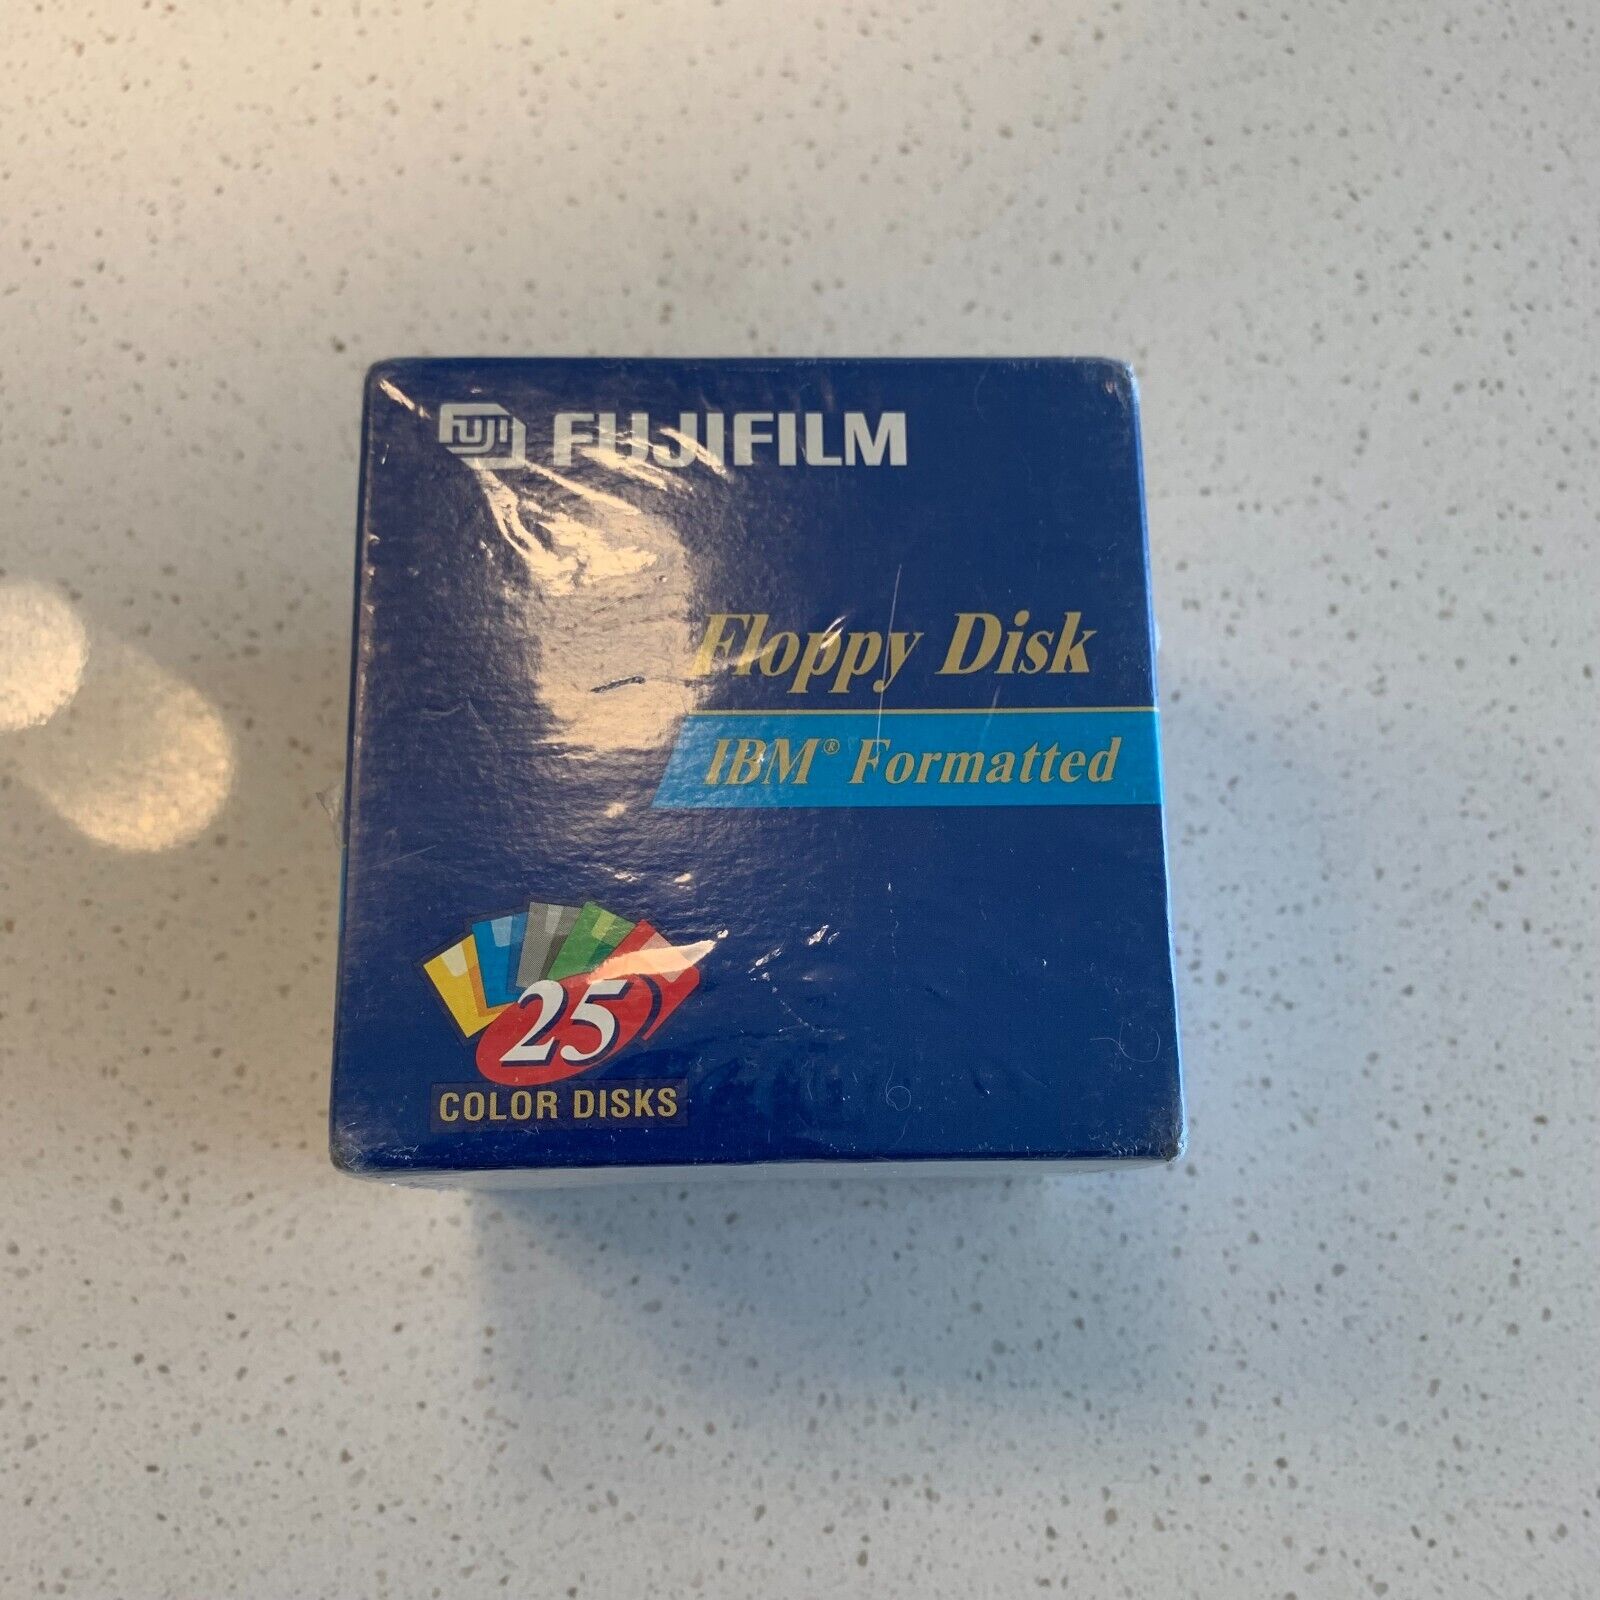 Fujifilm Box of 25 IBM Formatted 1.44MB Colored Floppy Disks Sealed New